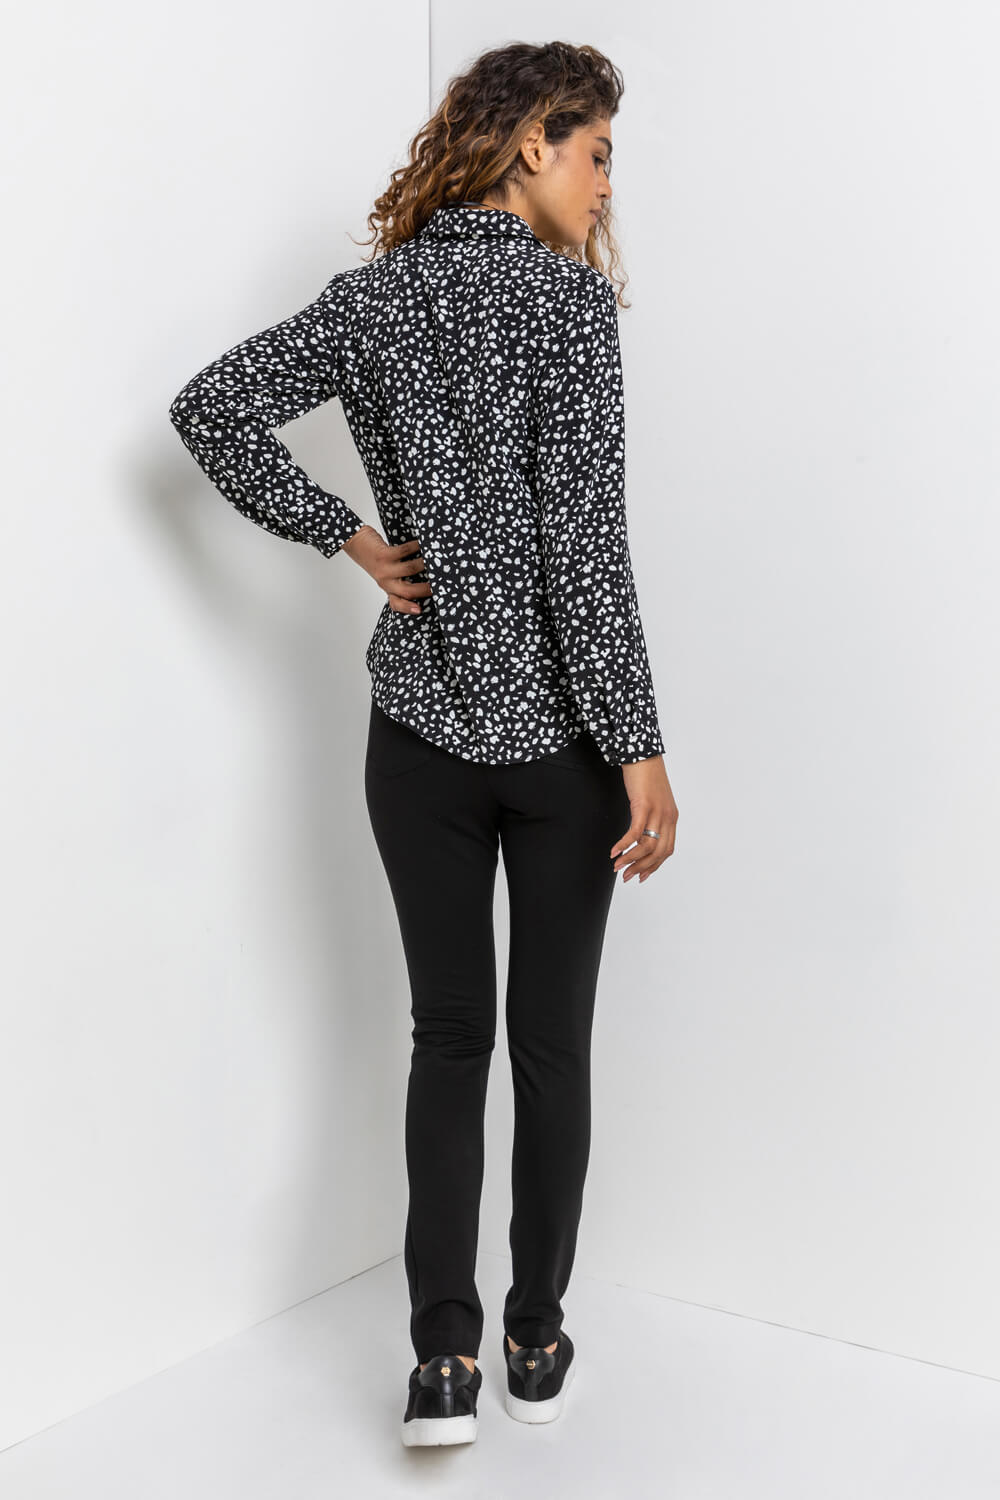 Black Abstract Spot Print Blouse, Image 2 of 5